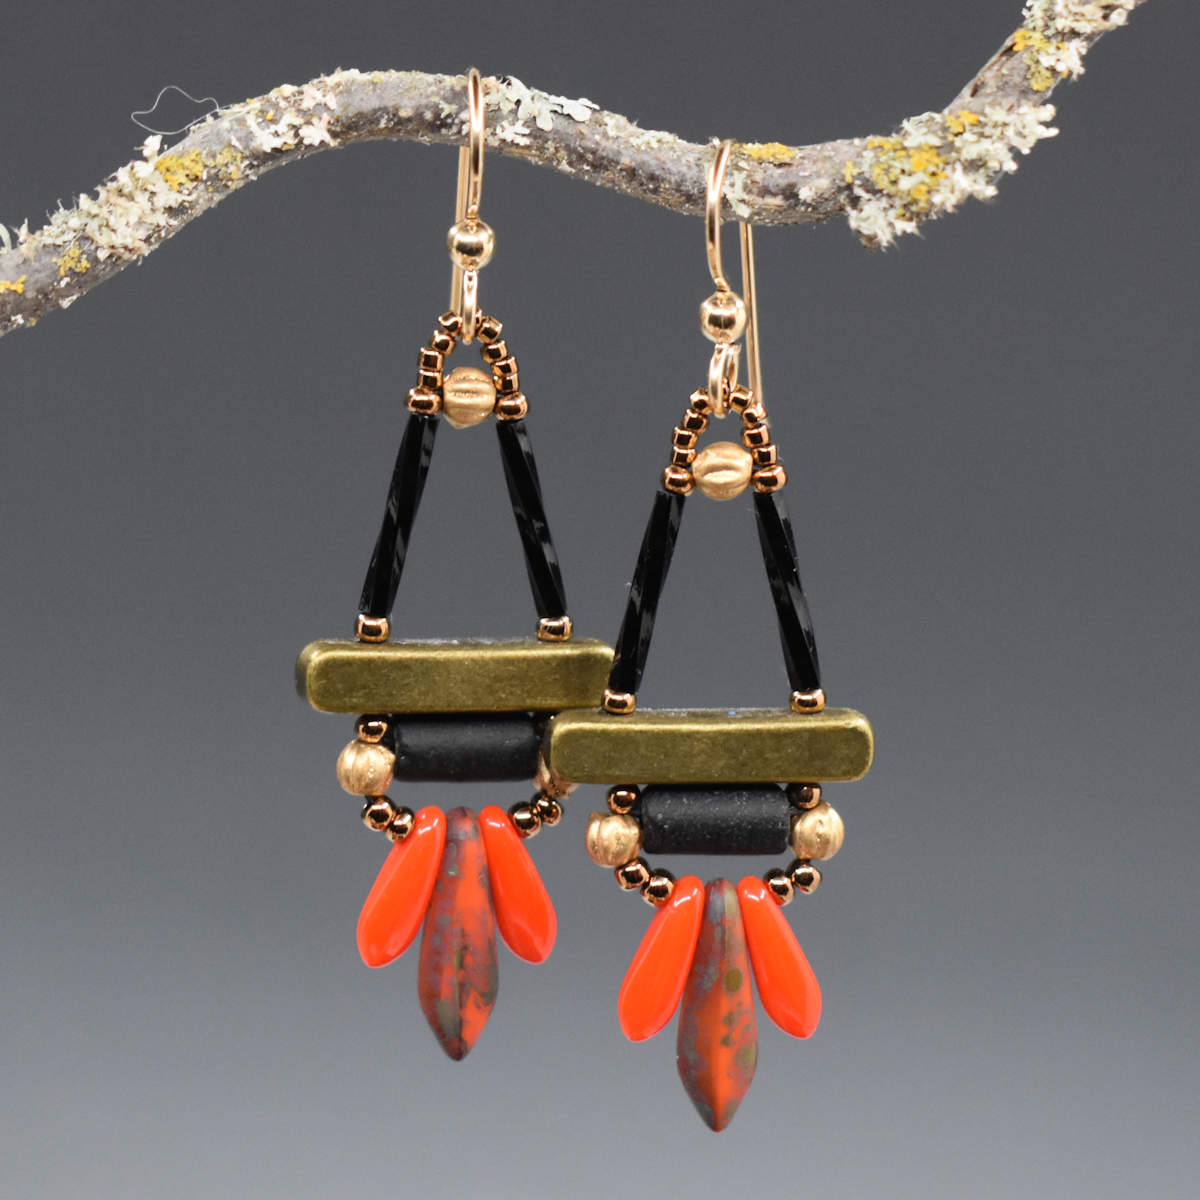 Black, red and gold earrings hang from a lichen covered twig in front of a gray background. The earrings are a triangle shape on top, with two black upright sides and a gold colored bar at the bottom. Below the gold bar is a black tube with gold beads on either side. At the bottom is a spray of three dagger shaped beads, light red smaller ones on the outside and a larger black-speckled red on the inside.